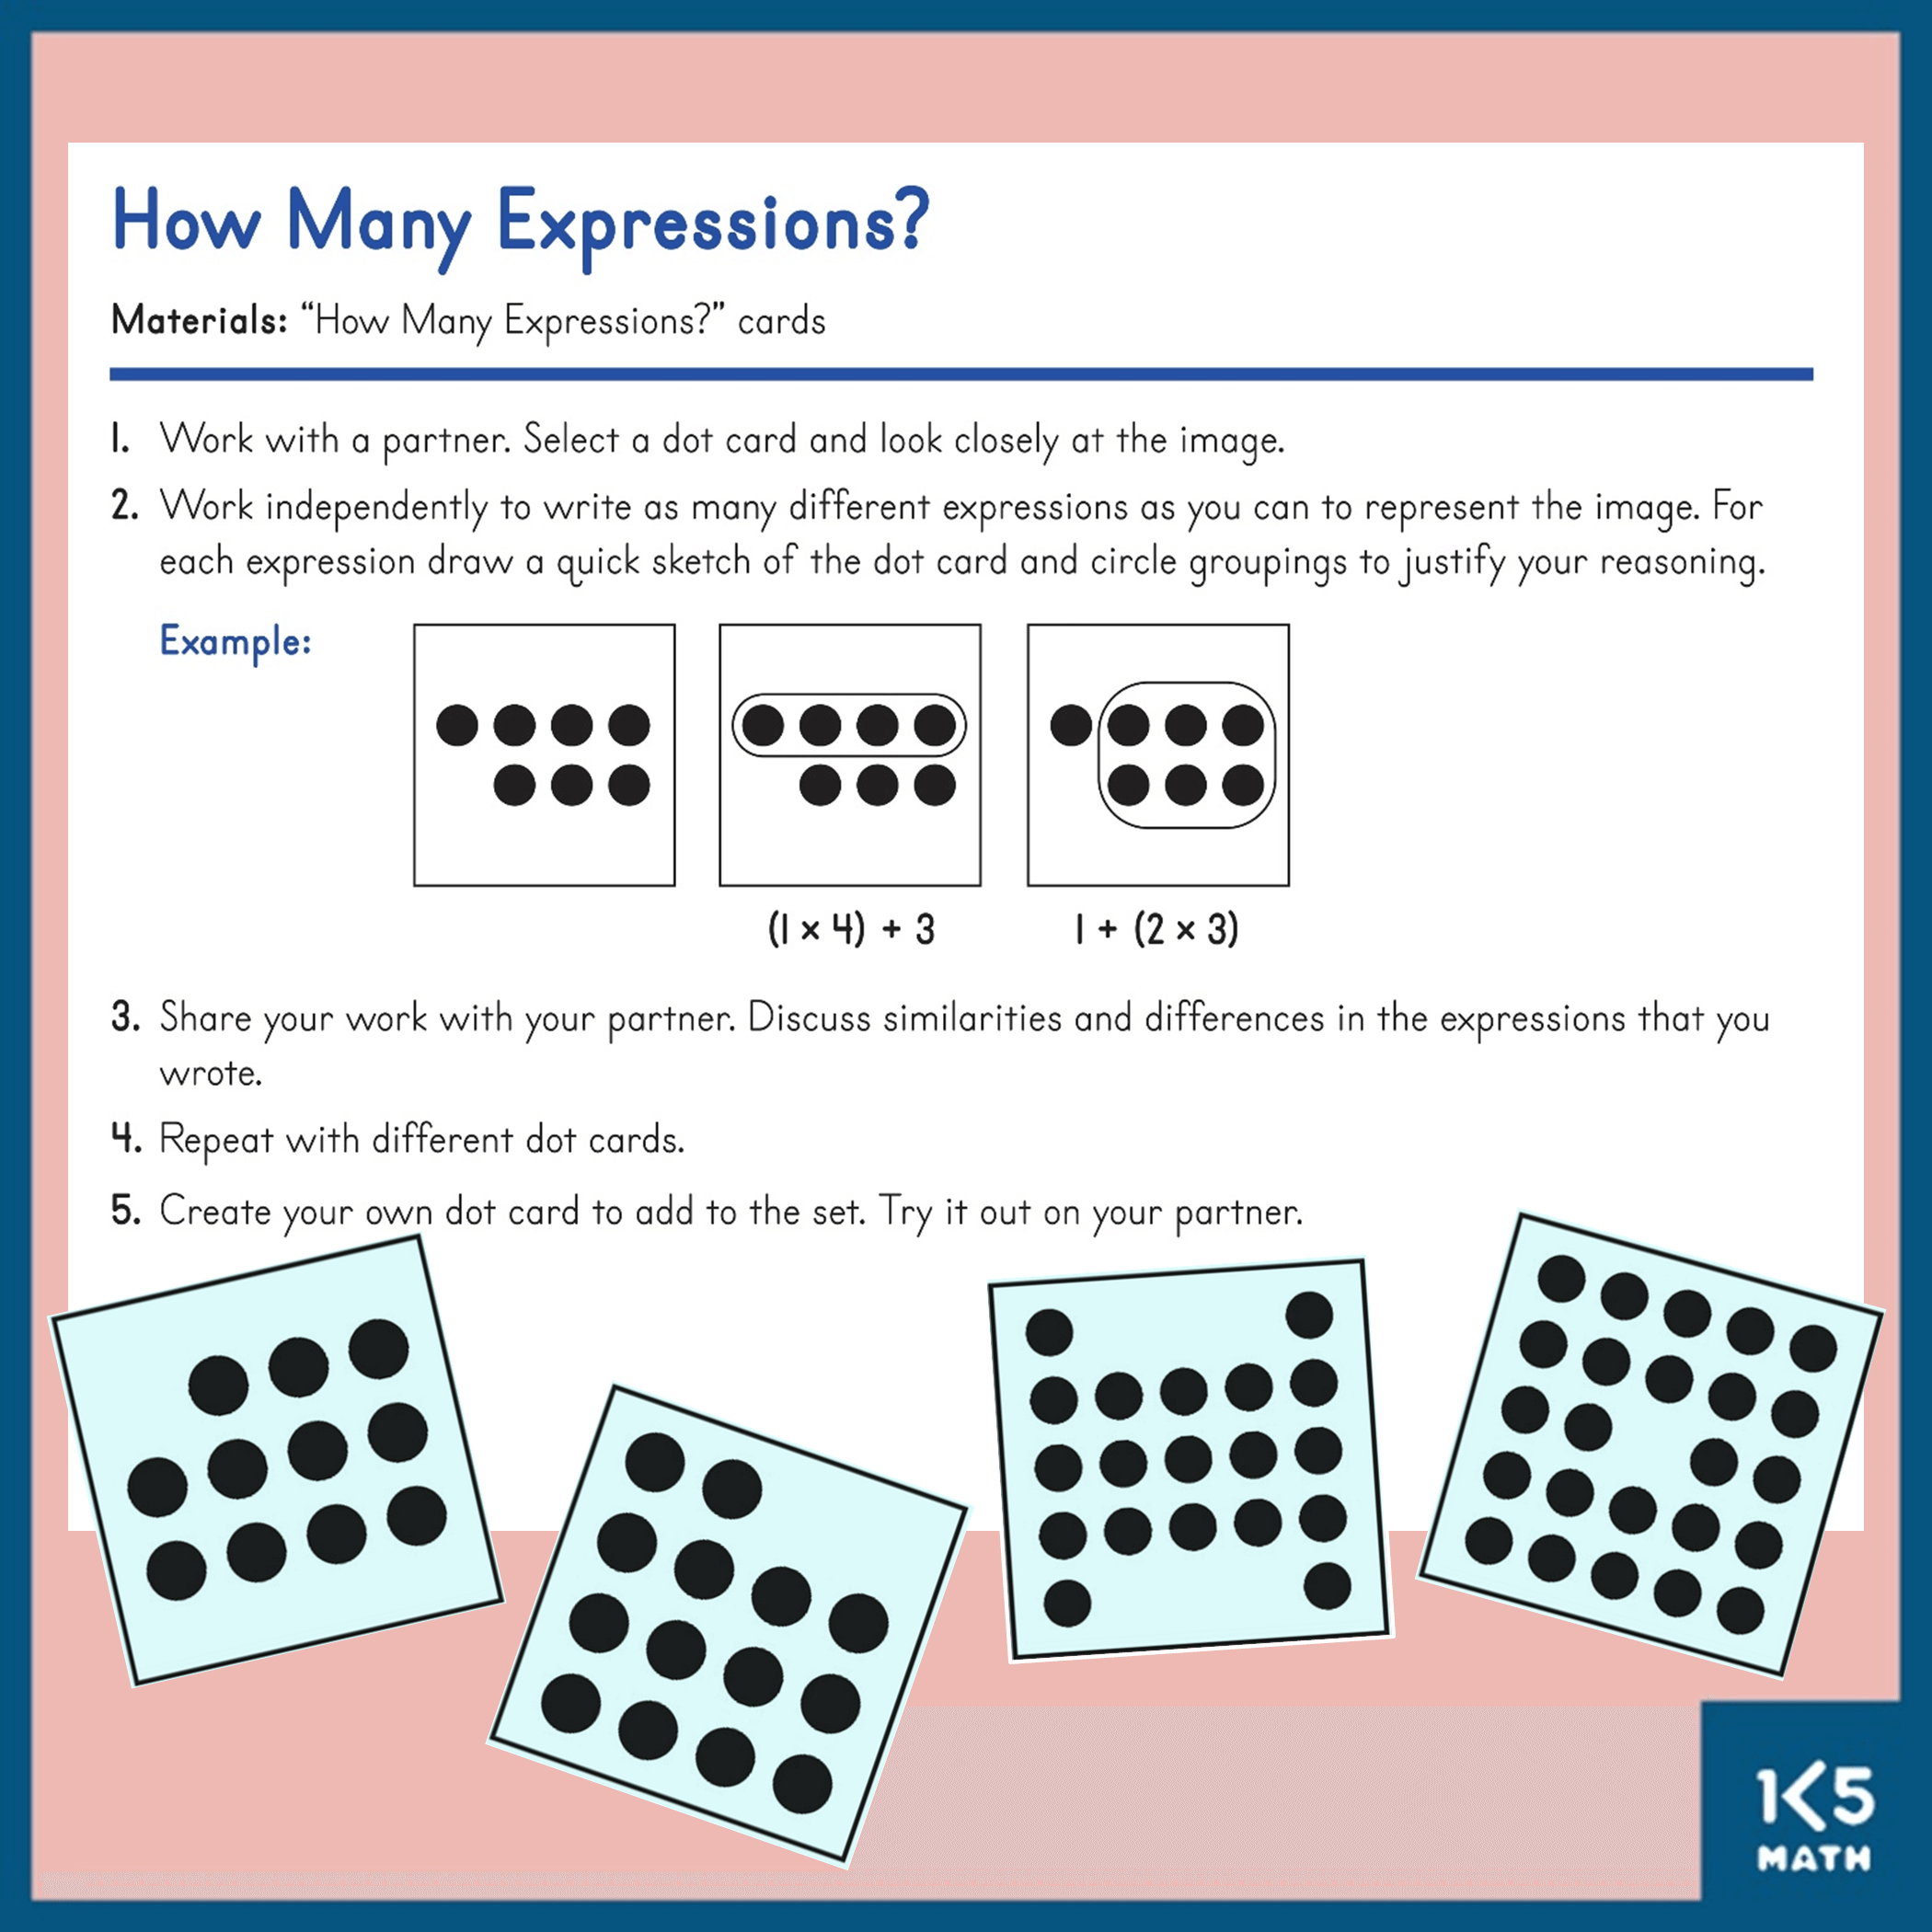 How Many Expressions?